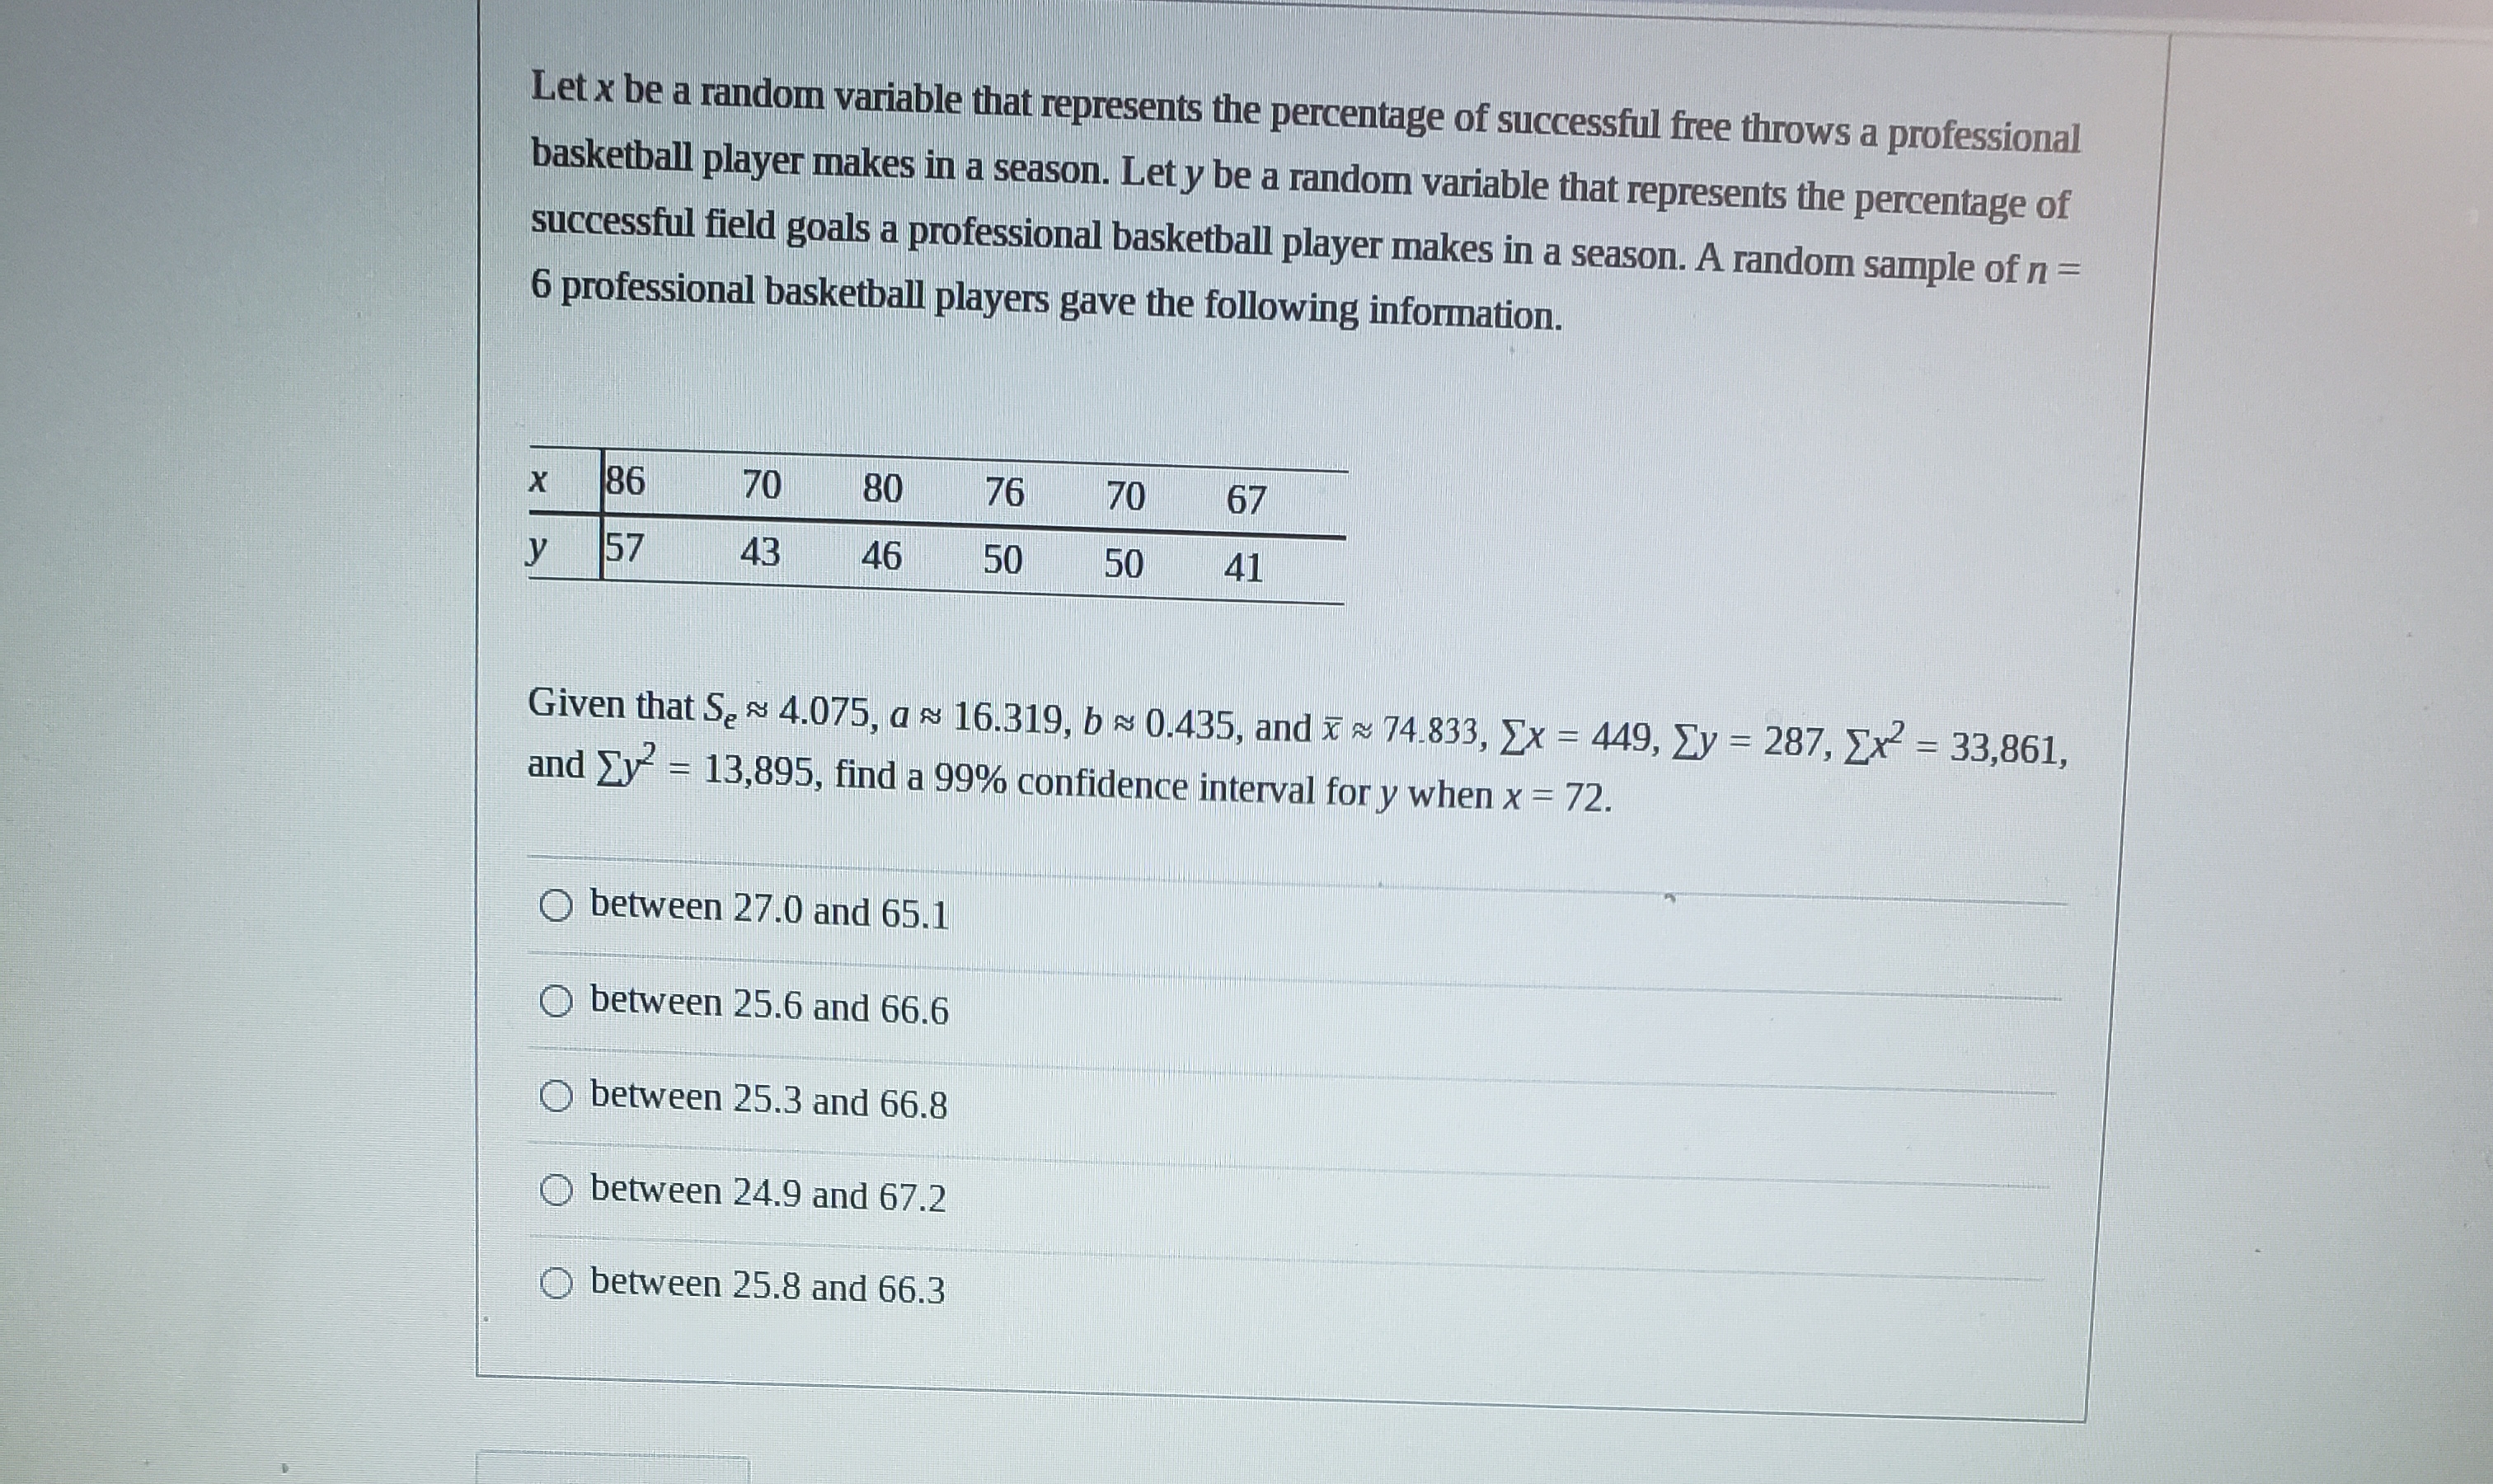 Let x be a random variable that represents the percentage of successful free throws a professional
basketball player makes in a season. Let y be a random variable that represents the percentage of
successful field goals a professional basketball player makes in a season. A random sample of n =
6 professional basketball players gave the following information.
86
70
80
76
70
67
y
57
43
46
50
50
41
Given that SeN 4.075, as 16.319, b 0.435, and x 74.833, Ex = 449, Ey = 287, Ex = 33,861,
and Ey
%3D
13,895, find a 99% confidence interval for y when x = 72.
%D
